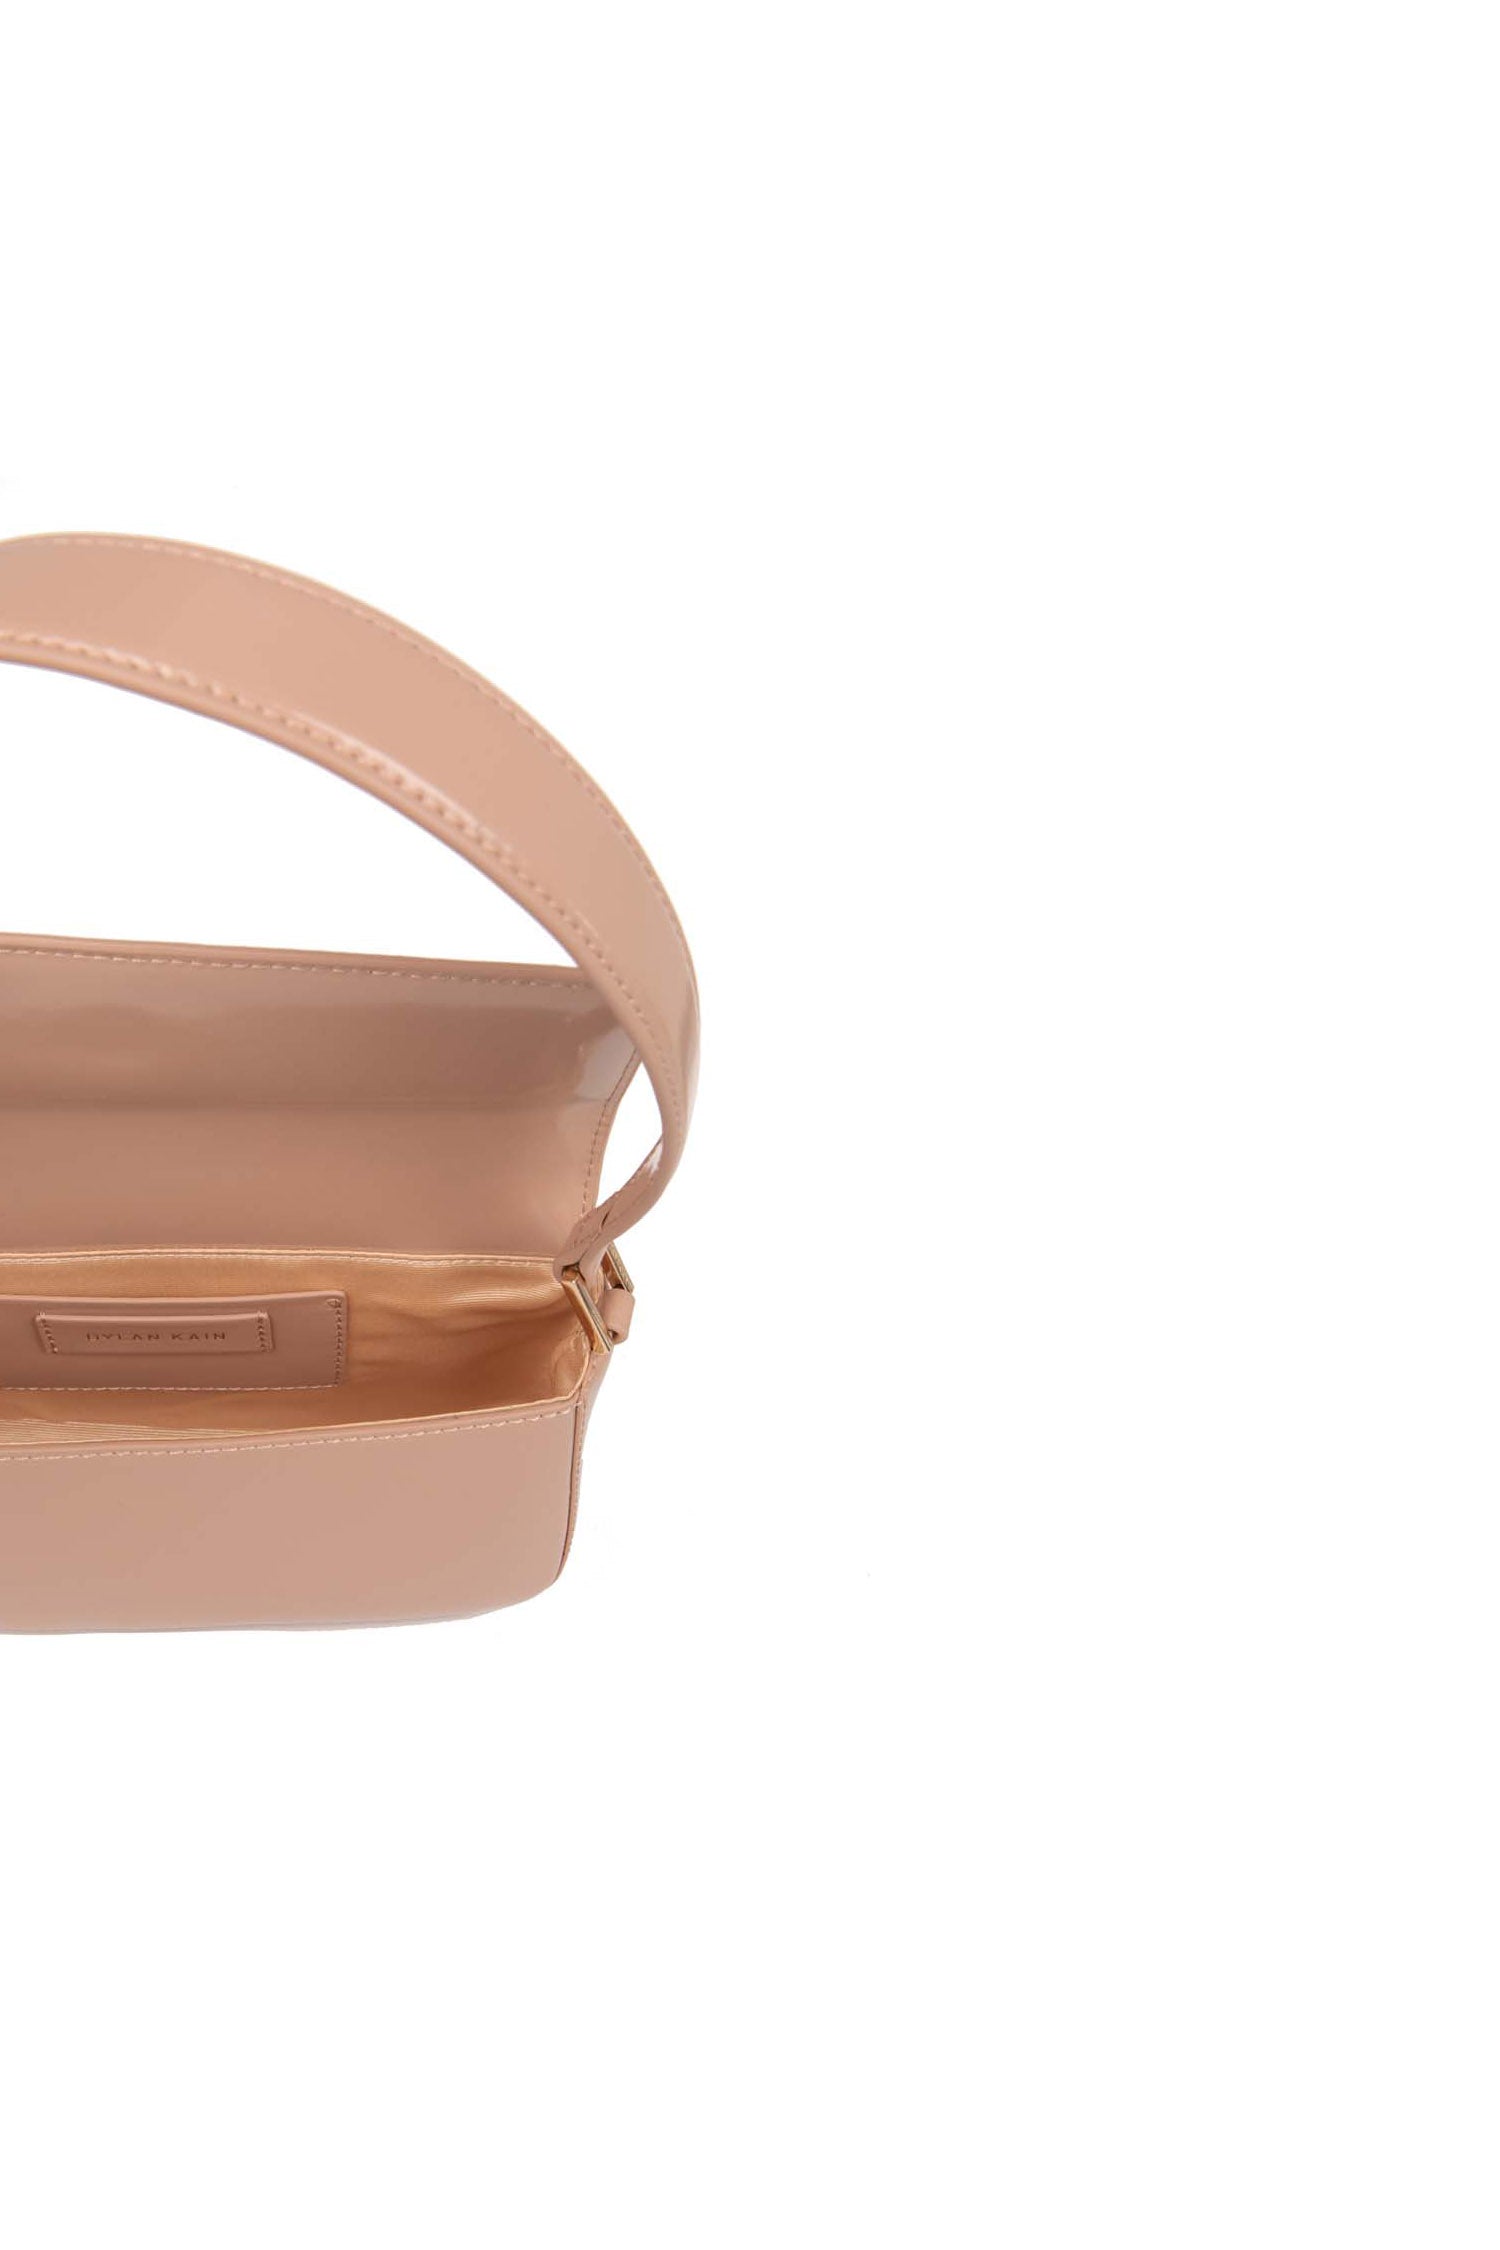 SAMPLE - The Baguette Patent Bag Fawn